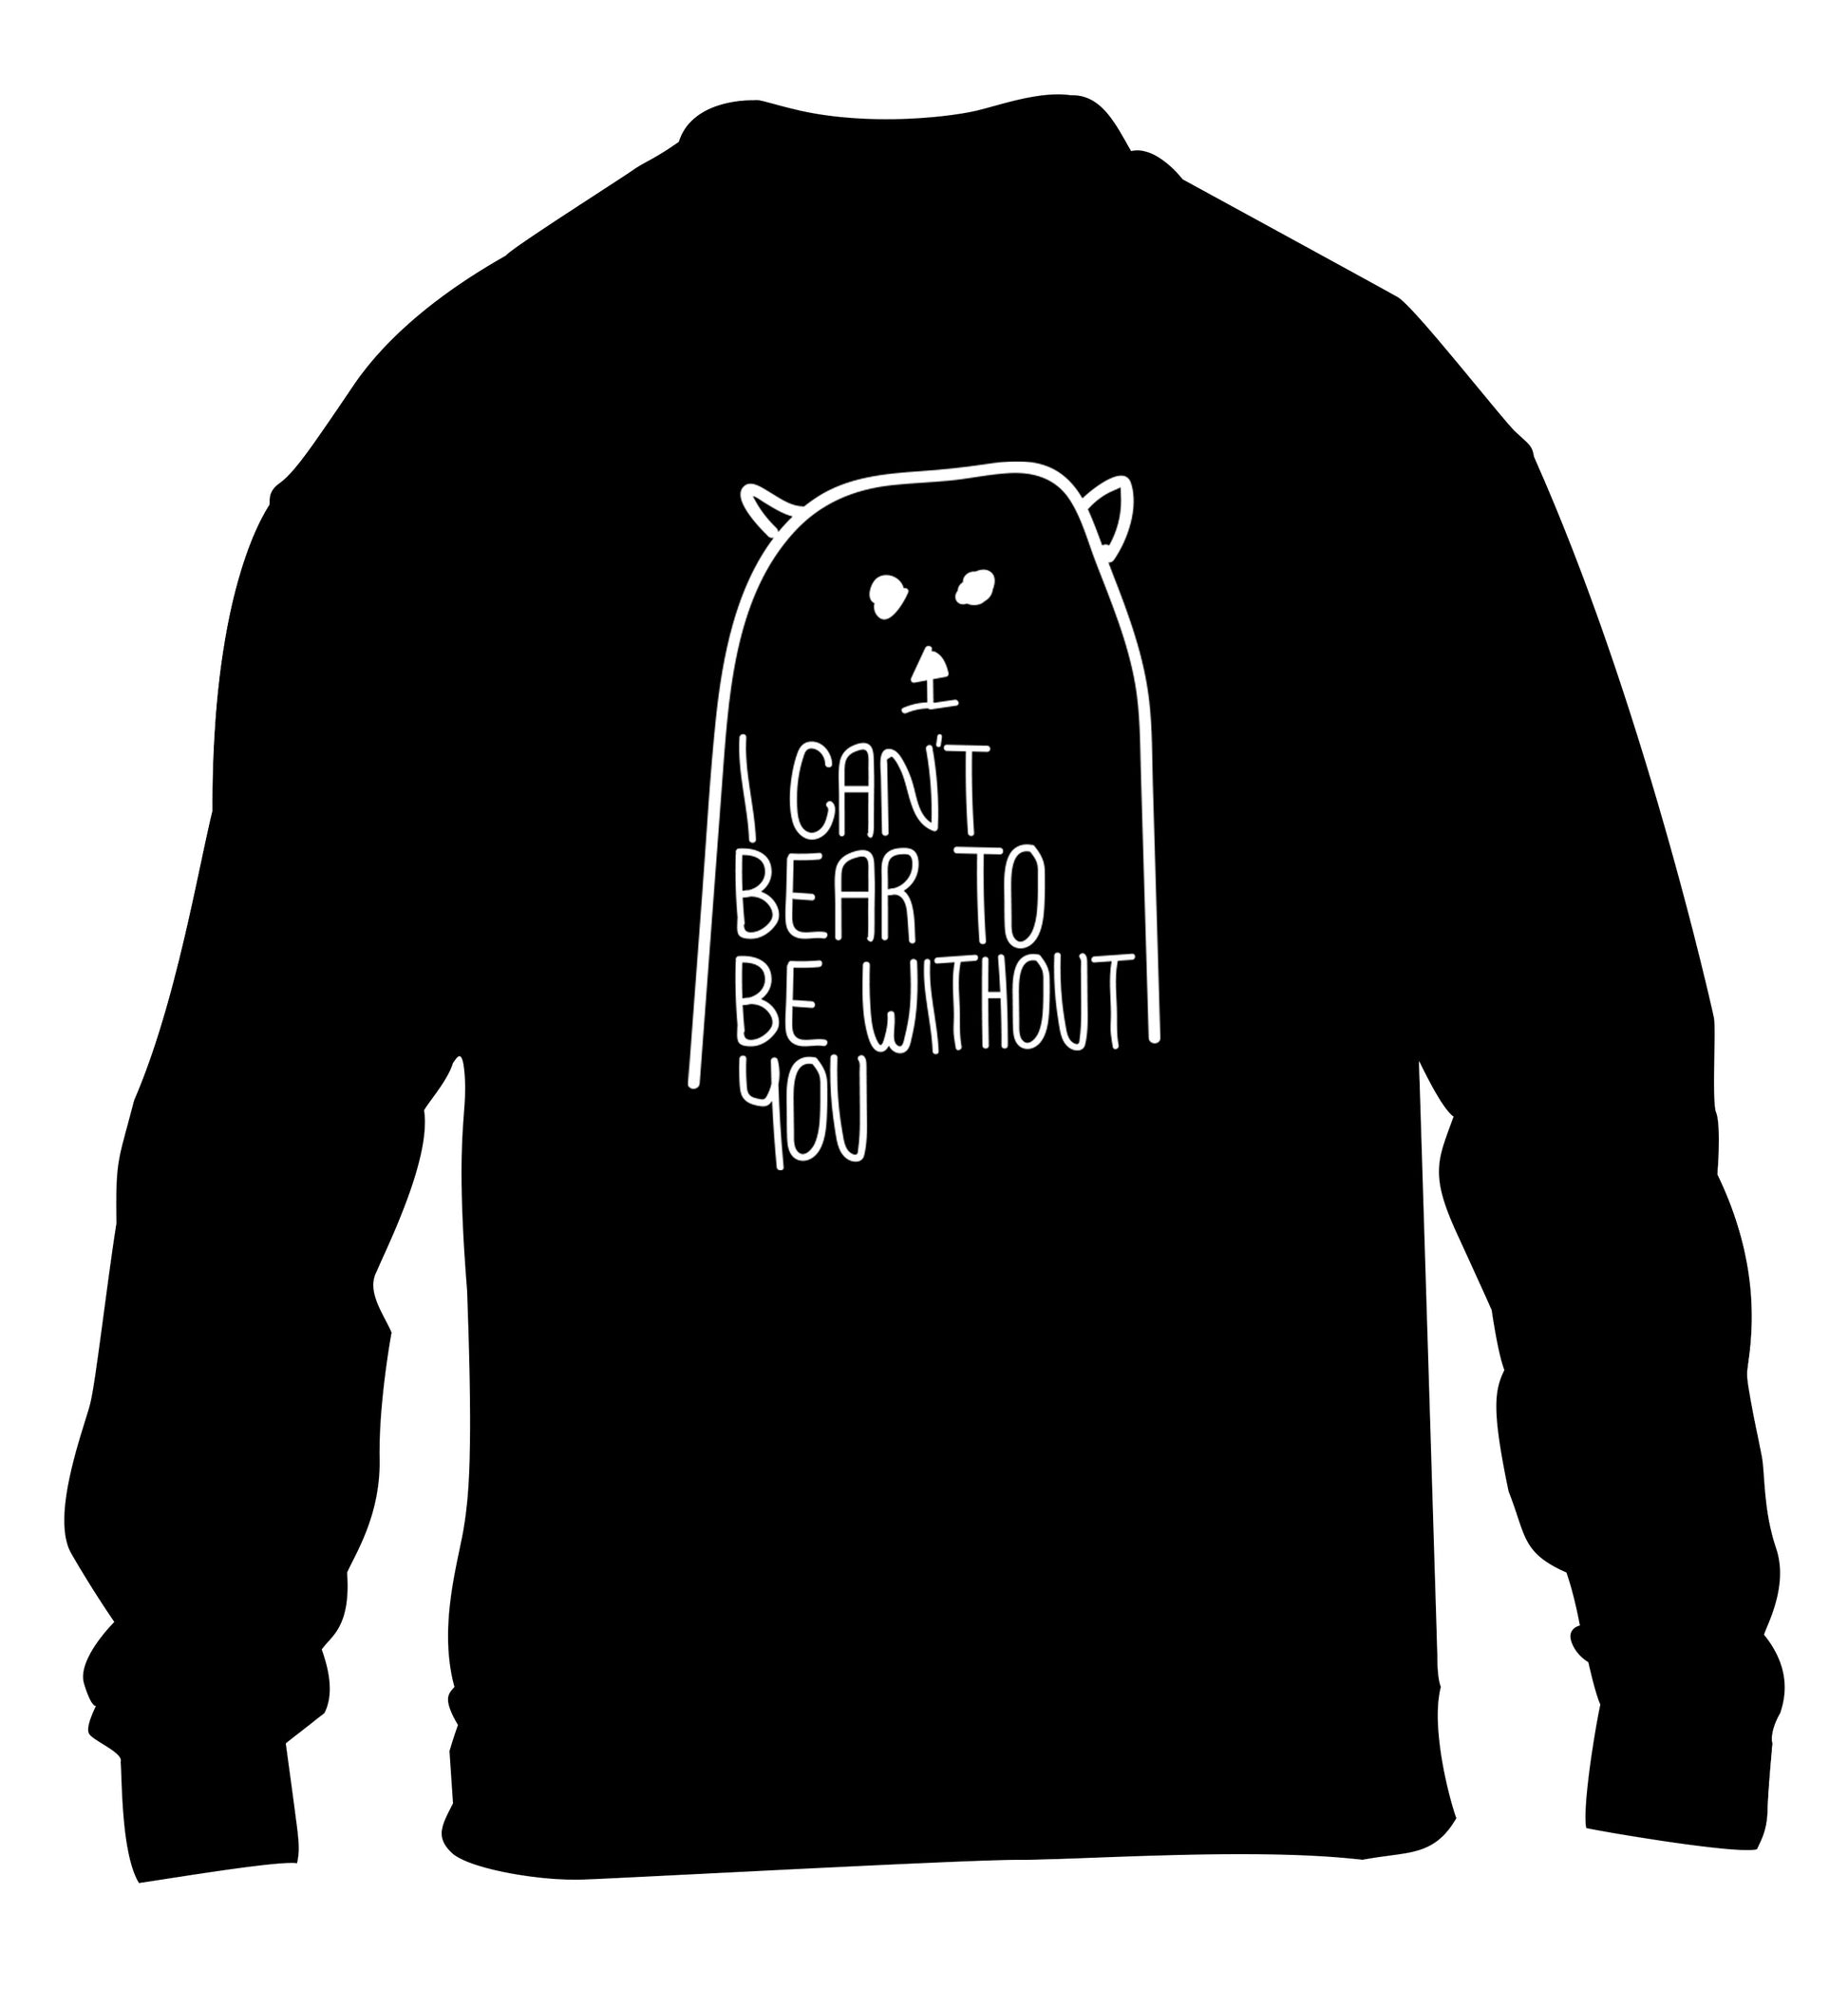 I can't bear to be without you children's black sweater 12-13 Years